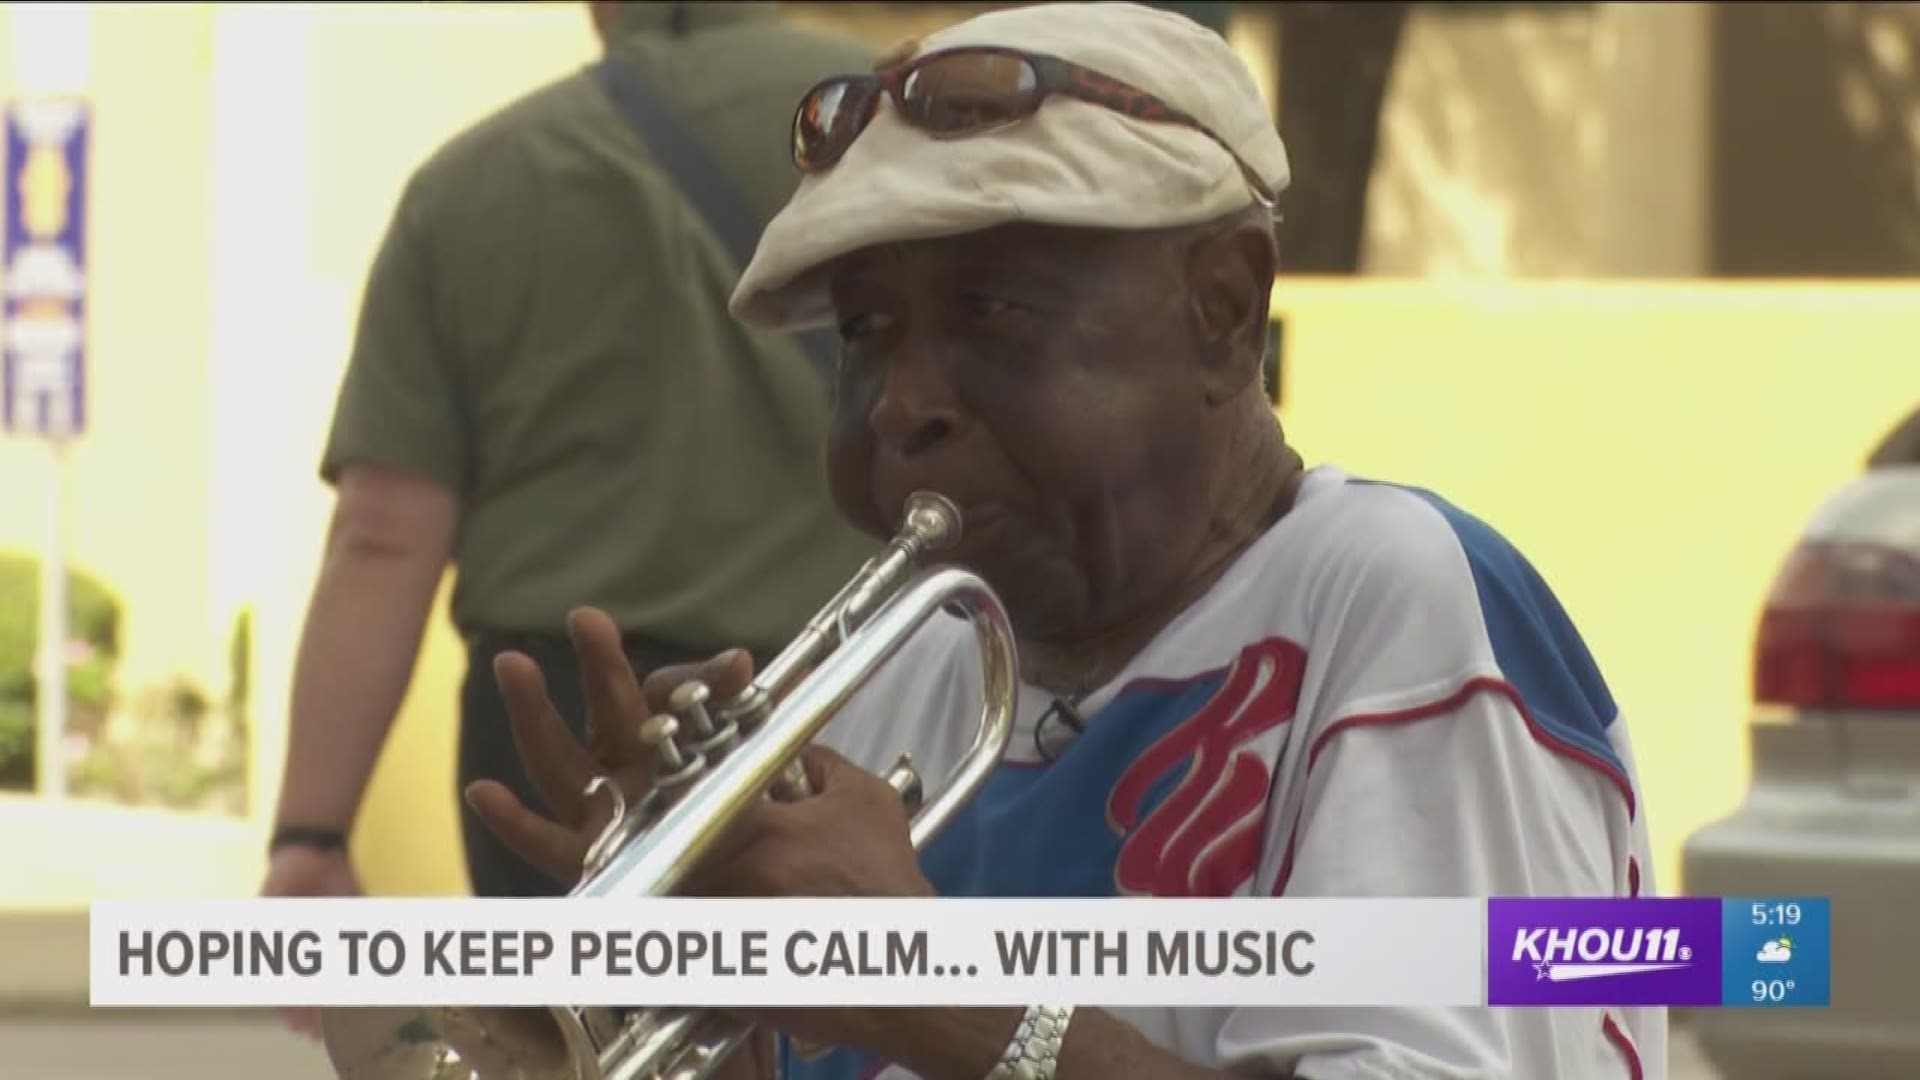 Phillip Flakes has been playing music outside the Harris County courthouse for more than a decade.